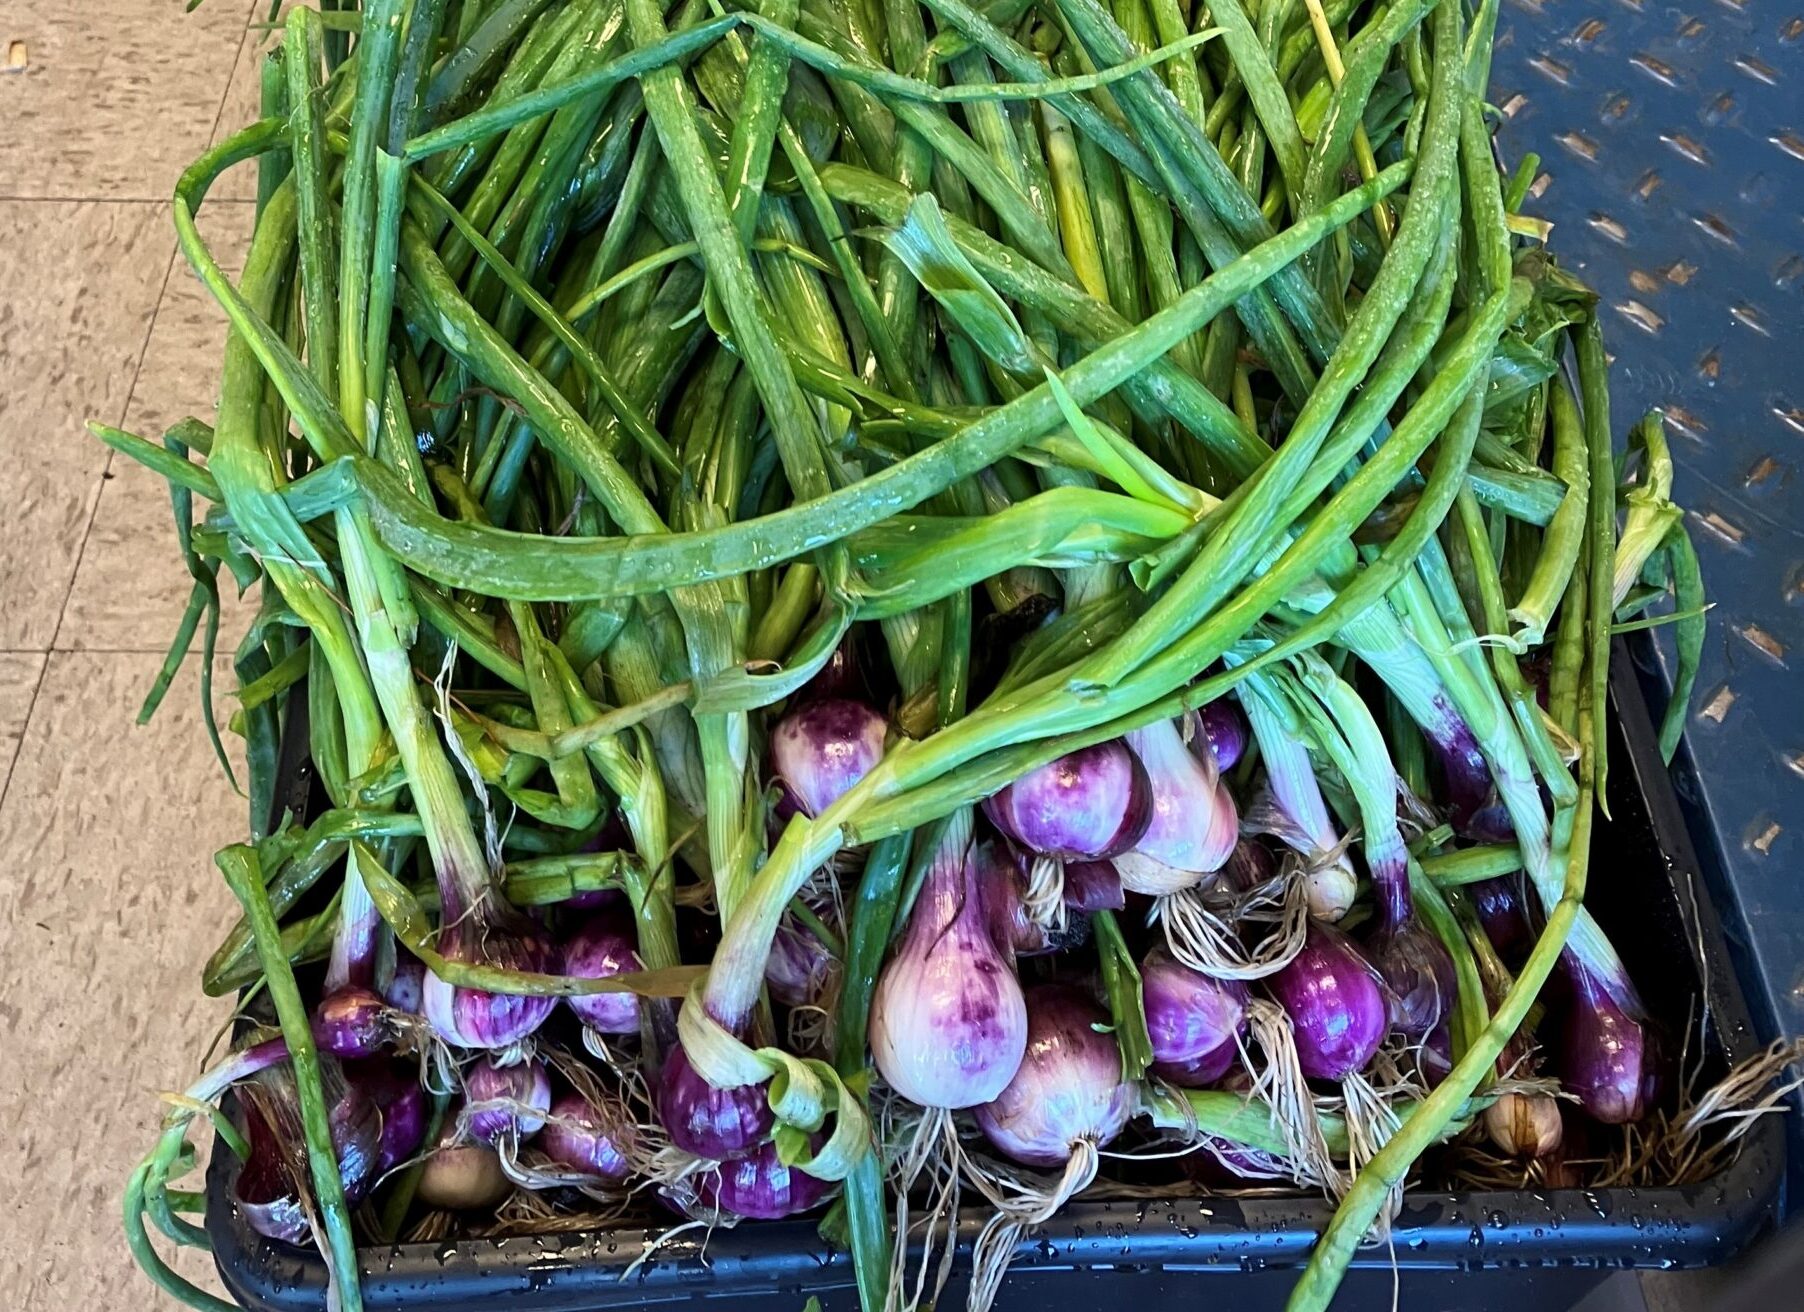 An Abundance of Onions: Growing Wethersfield Red Onions at the Museum